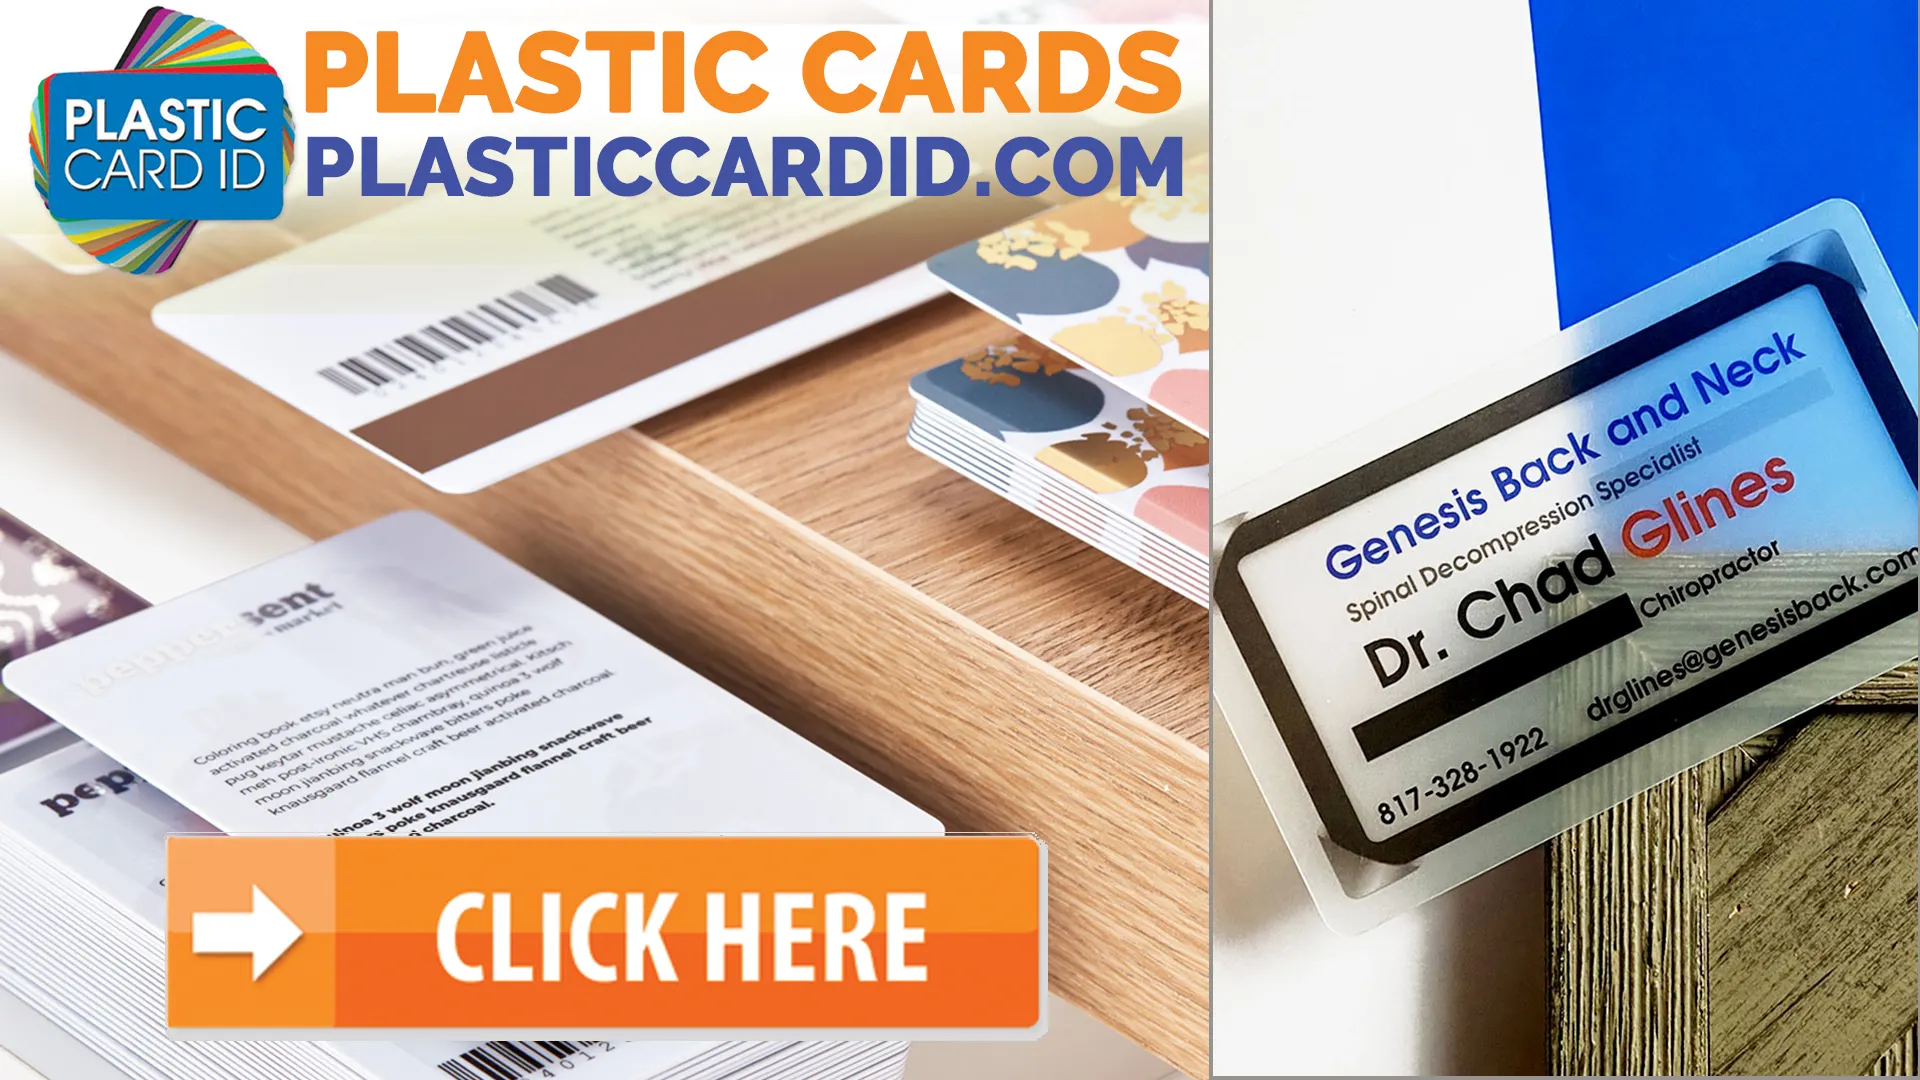 Welcome to Your Ultimate Financial Guide for Your Plastic Card Project